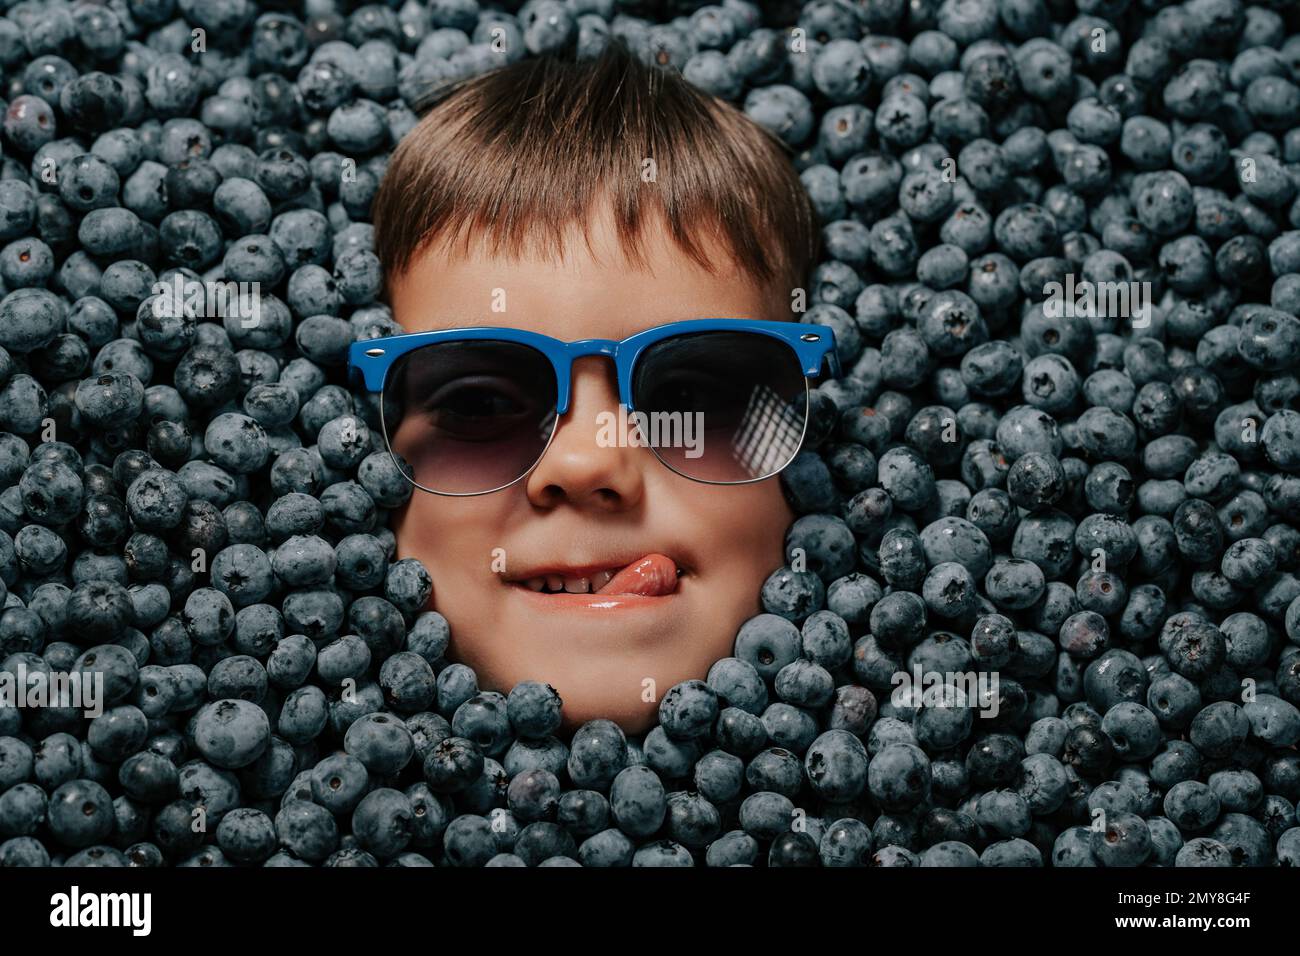 Smiling little boy face in eyewear fresh ripe berries - blueberries. Child covered with blackberry. Kid enjoying organic bilberry plant. Diet, antioxi Stock Photo